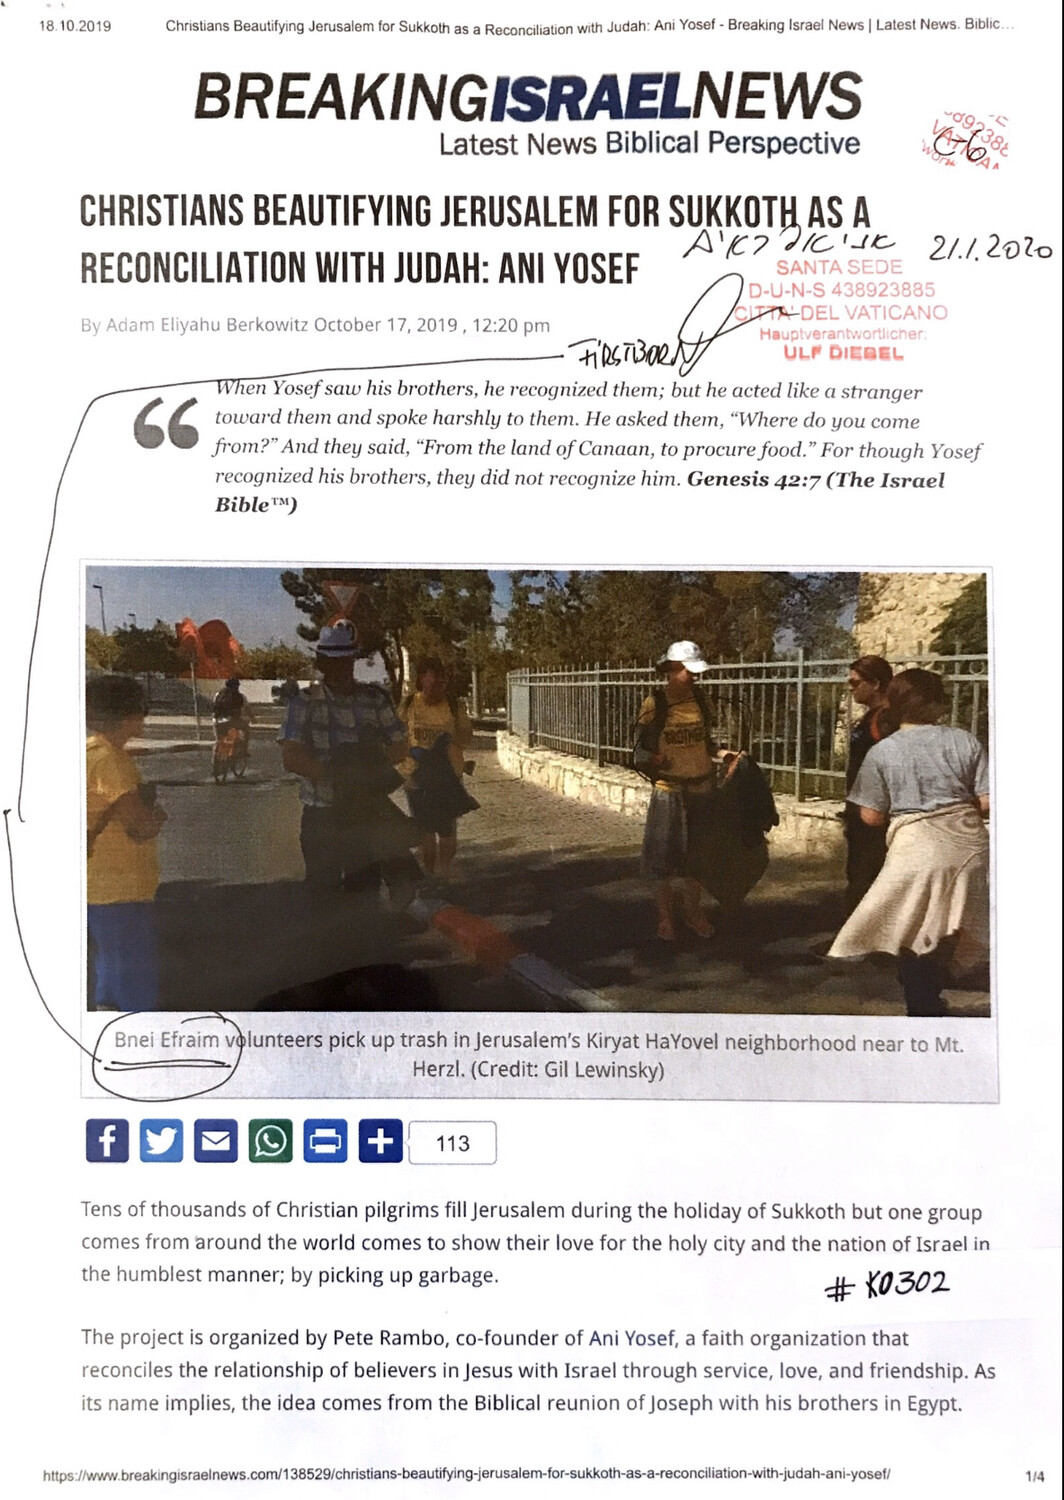 #K0302 l Breaking Israel News - Christians beautifying Jerusalem for Sukkoth as a reconciliation with Judah: Ani Yosef 